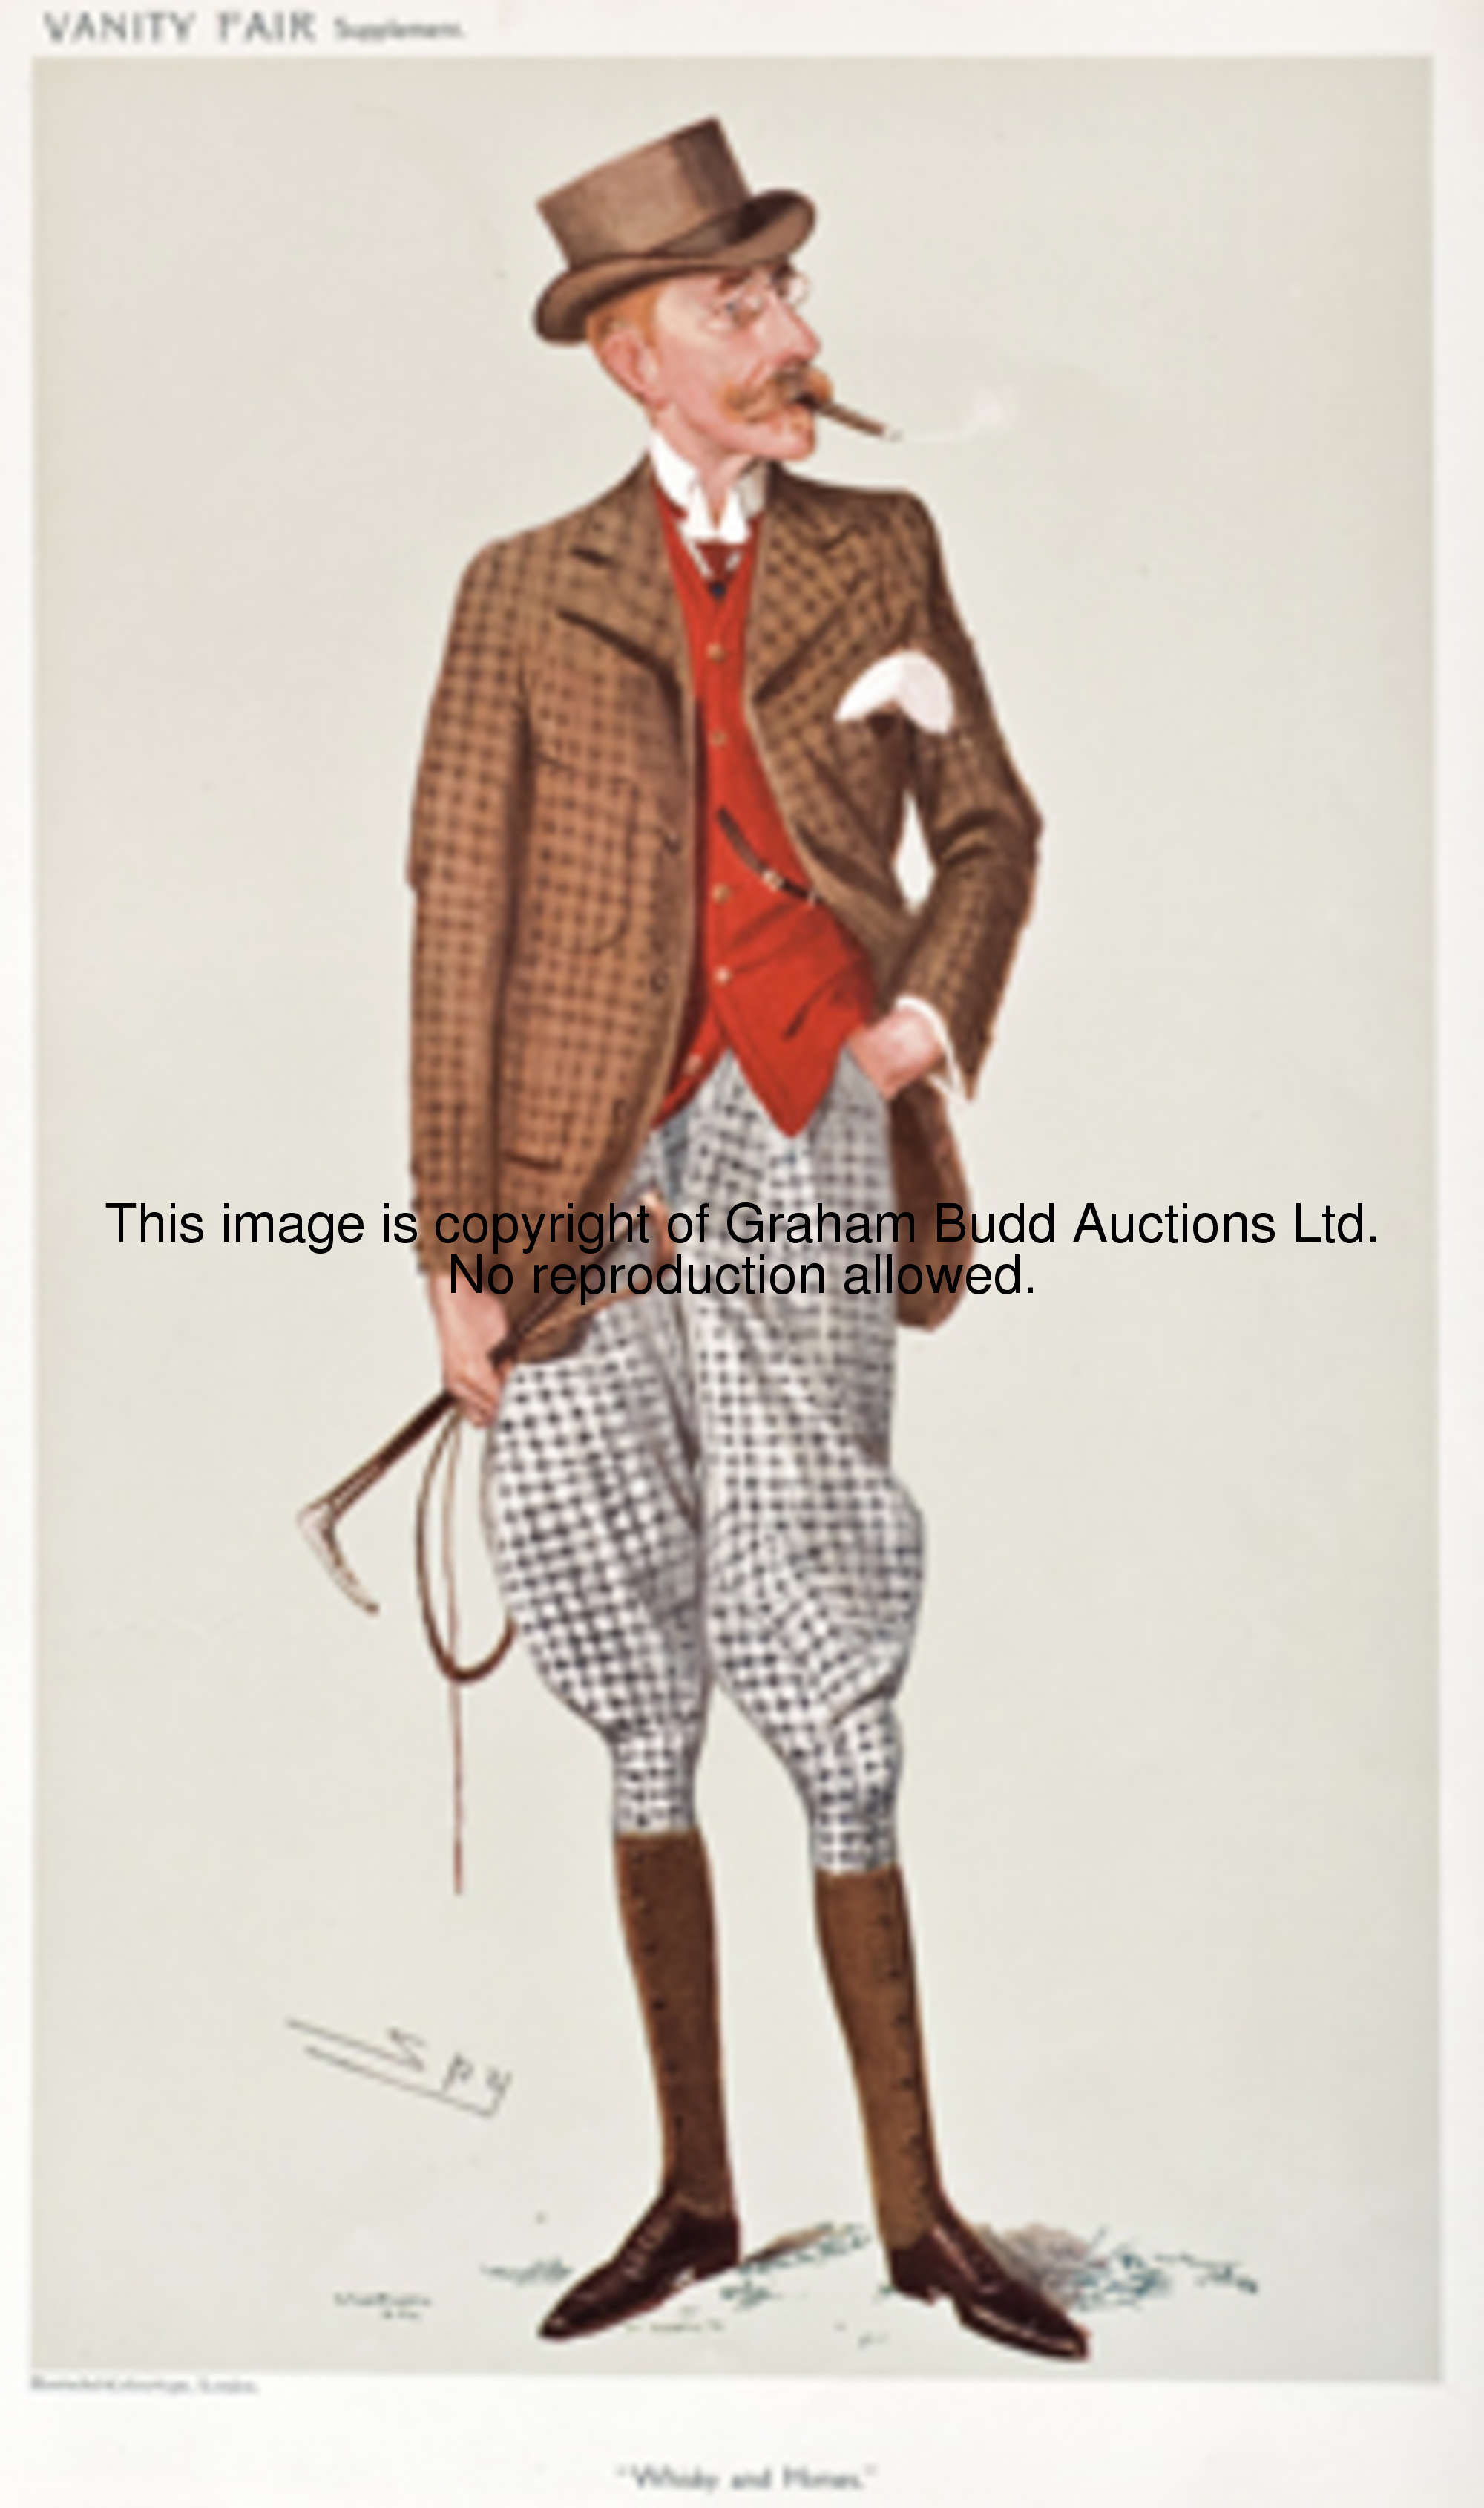 A collection of 40 Vanity Fair prints from the Turf Devotees series, by Ape, Spy, Elf, GDG & Lib, un...